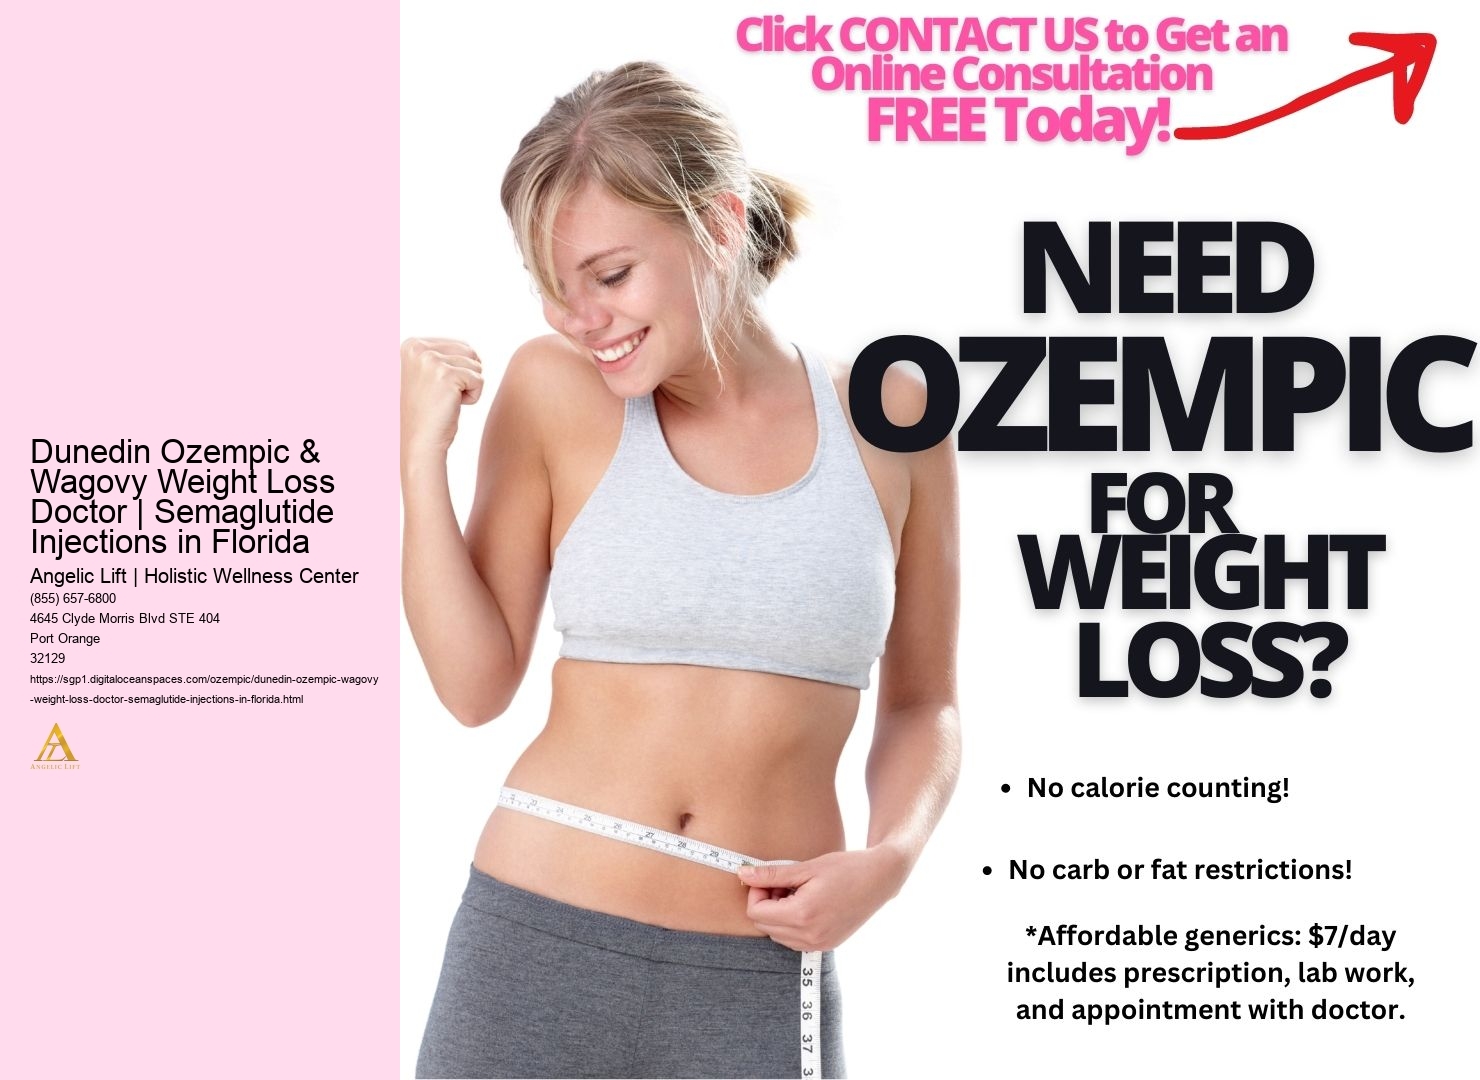 Dunedin Ozempic & Wagovy Weight Loss Doctor | Semaglutide Injections in Florida